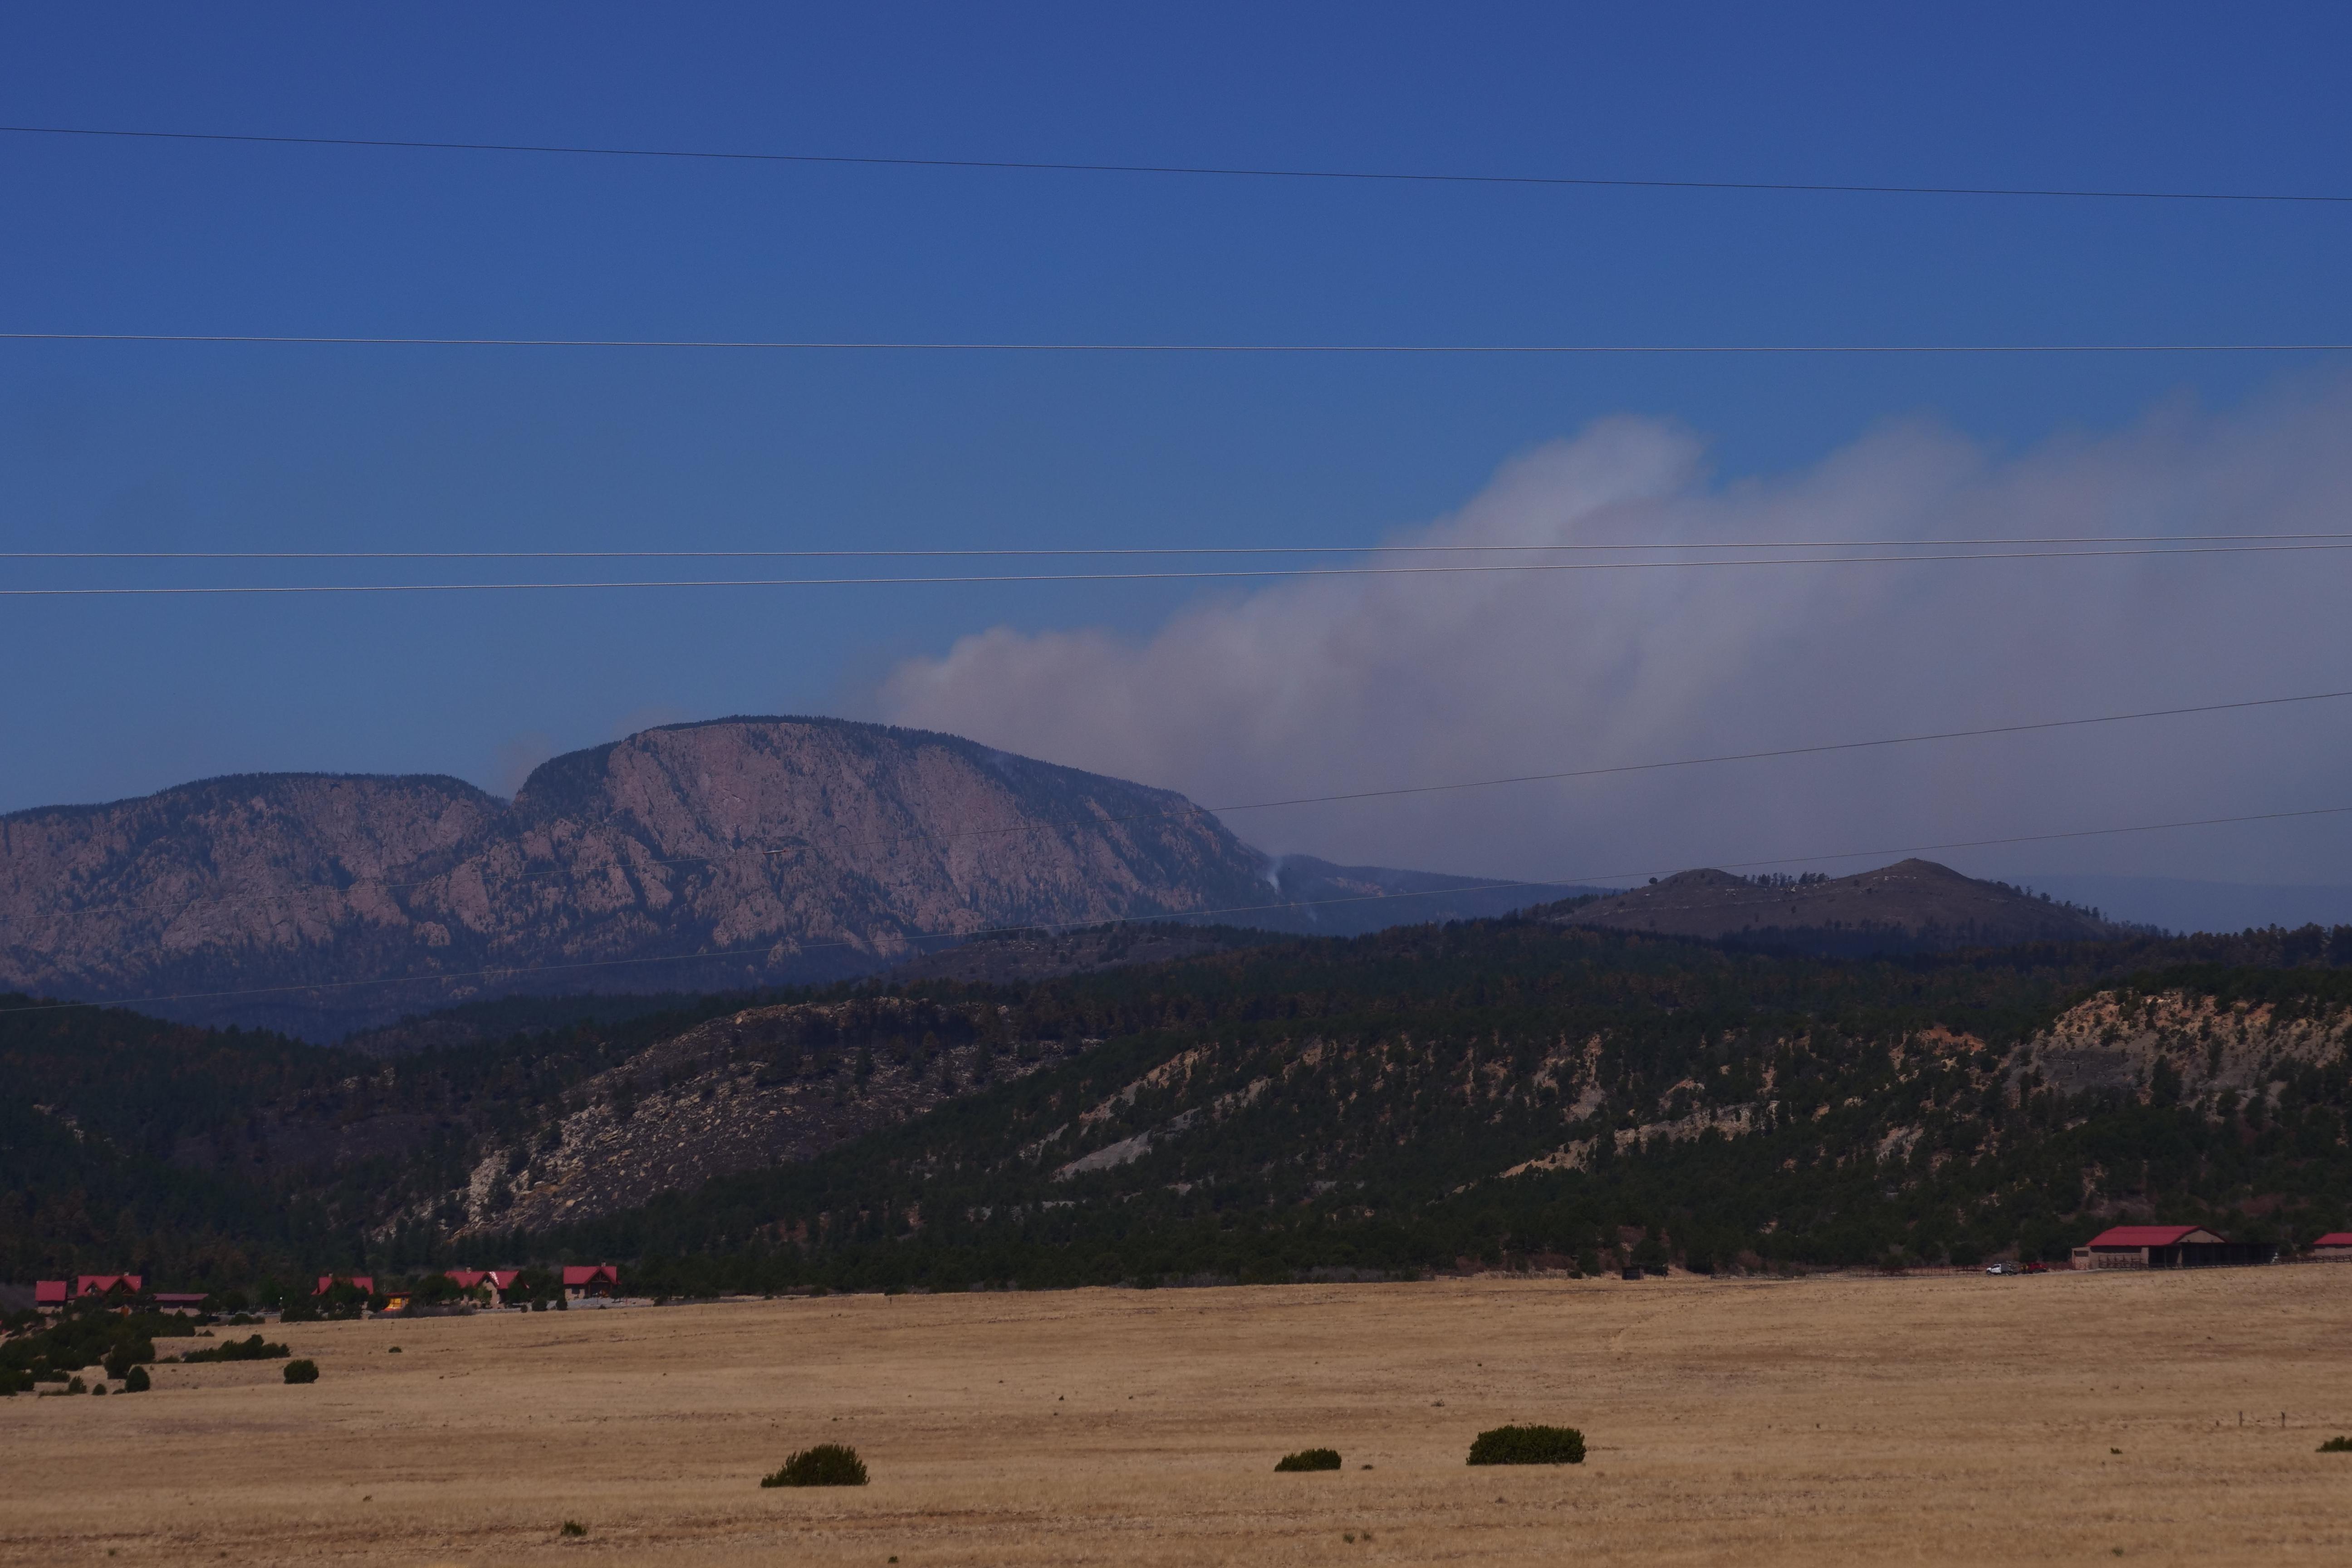 A mountain named Hermits Peak is shown in the distance with a column of smoke visible behind it.